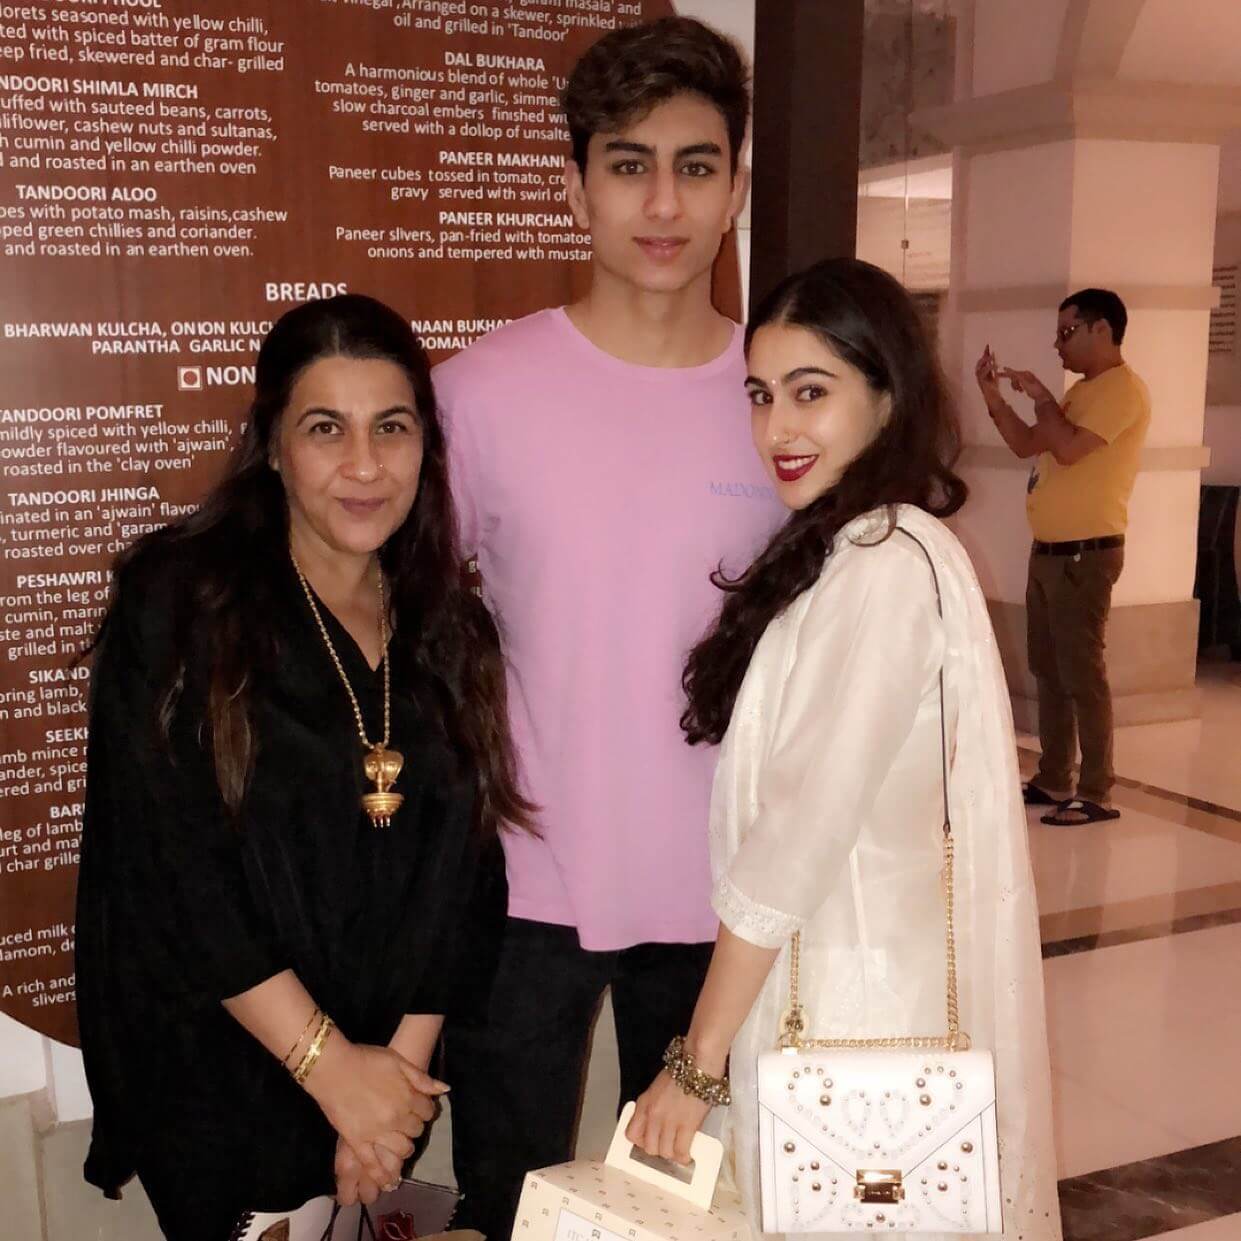 Sara Ali Khan Along With Her Mother and Brother